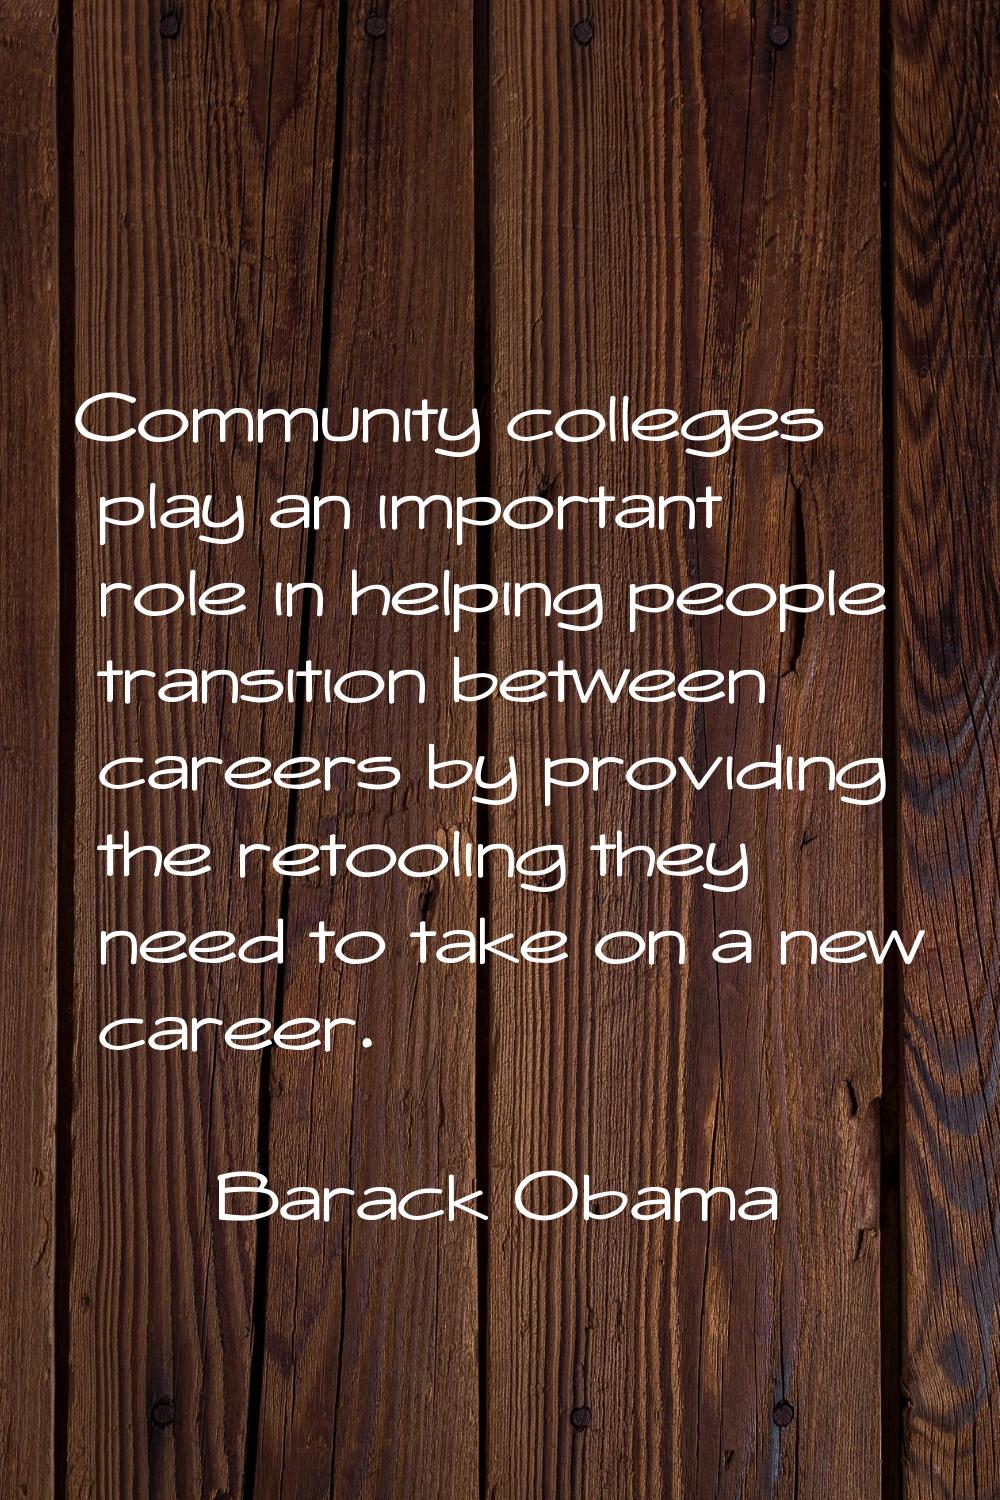 Community colleges play an important role in helping people transition between careers by providing